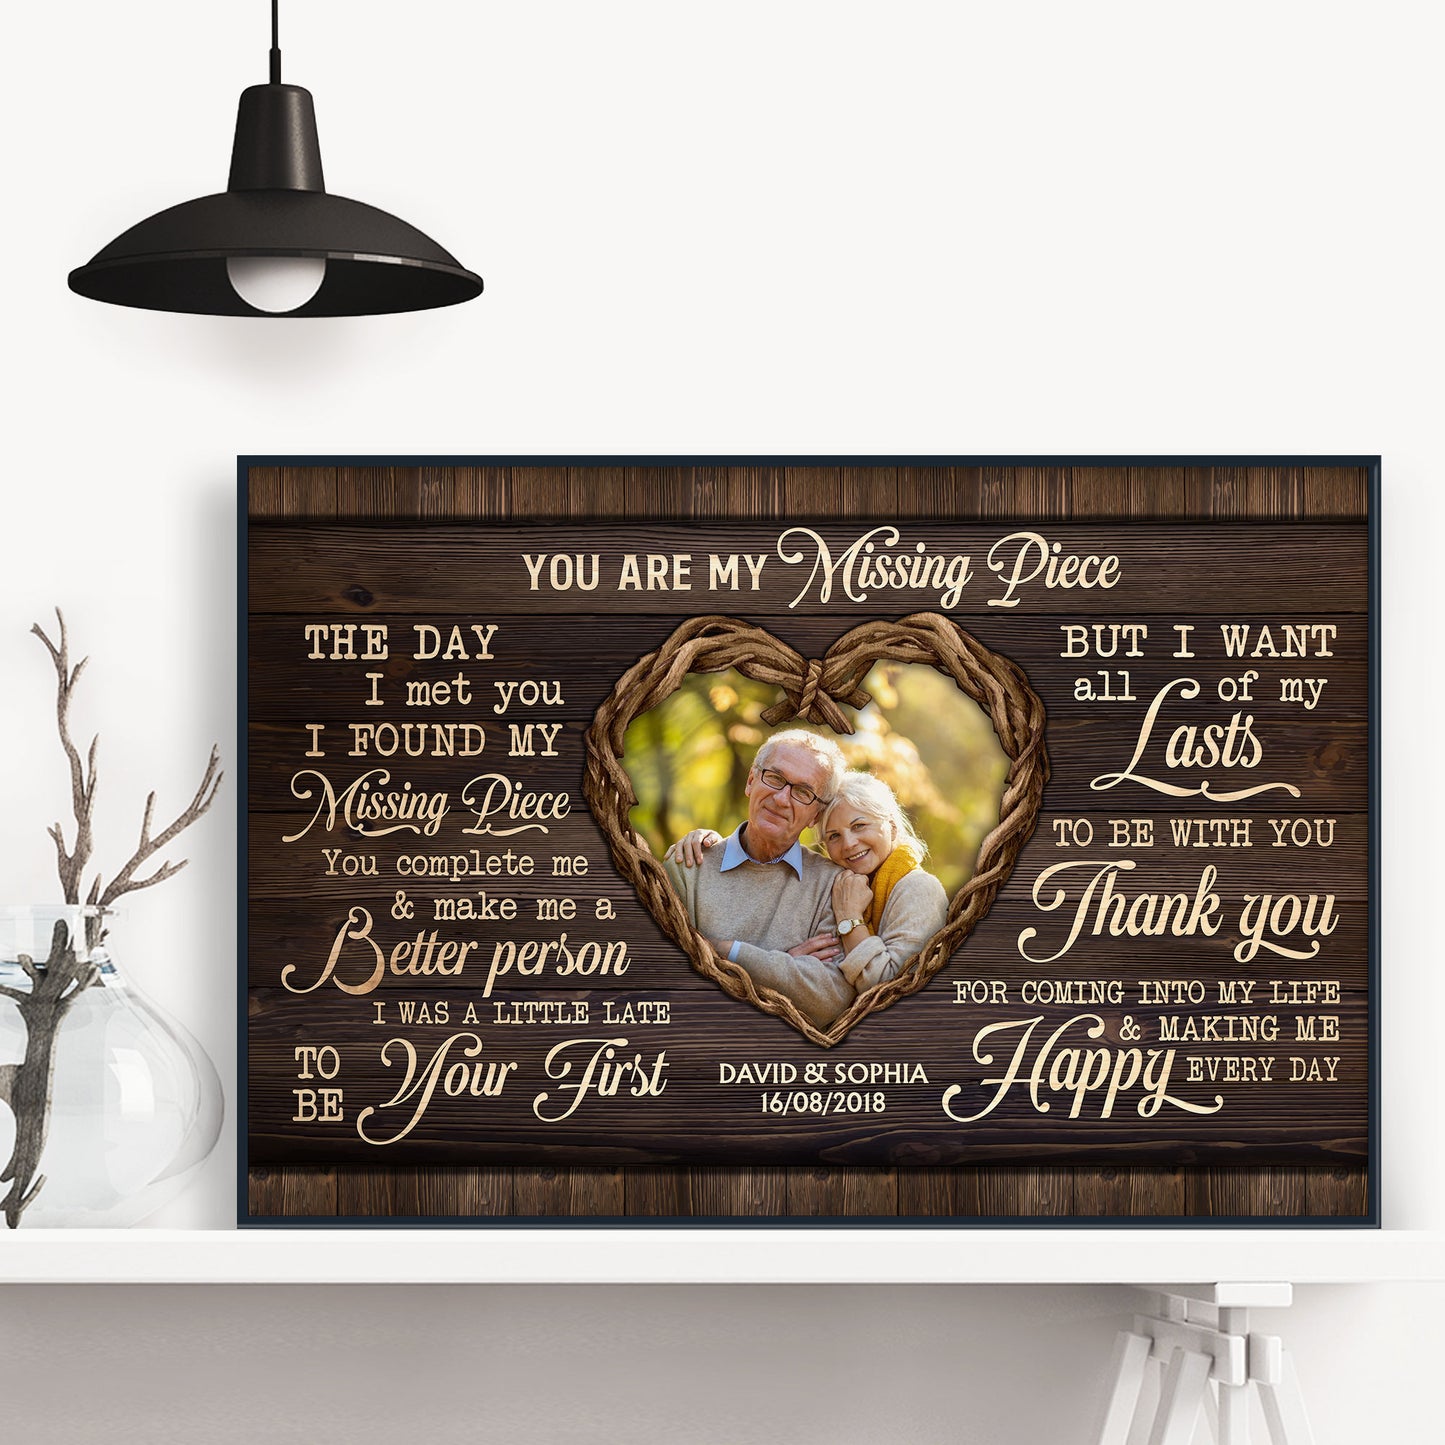 You Are My Missing Piece - Personalized Photo Poster/Wrapped Canvas